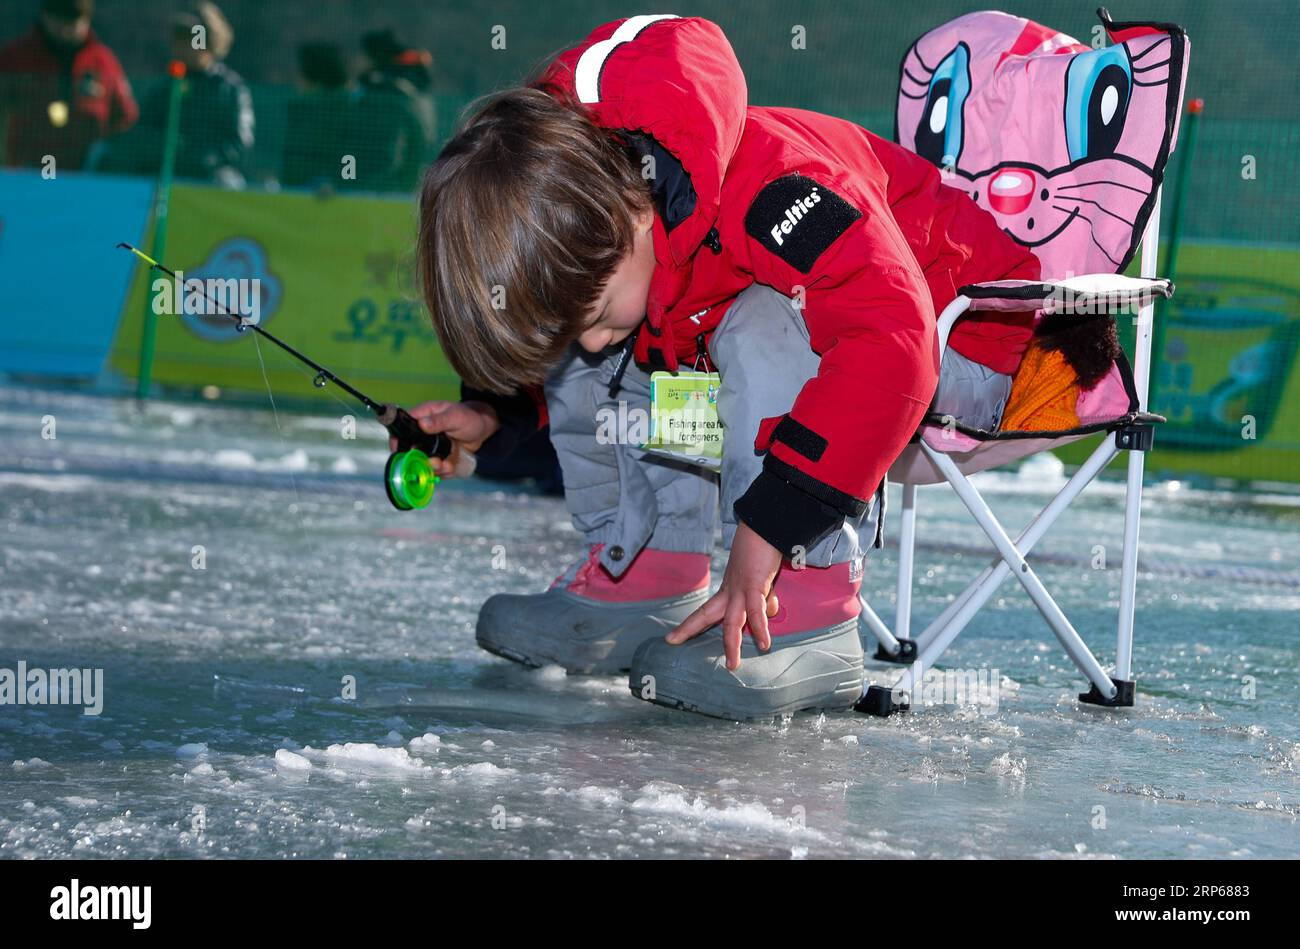 (190105) -- HWACHEON, Jan. 5, 2019 -- A boy fishes for trouts on a frozen river during the Sancheoneo Ice Festival in Hwacheon, South Korea, Jan. 5, 2019. As one of the biggest winter events in South Korea, the annual three-week festival draws people to the frozen Hwacheon river, where organizers drill fishing holes in the ice and release trouts into the river during the festival period. This year the festival lasts from Jan. 5 to Jan. 27. ) SOUTH KOREA-HWACHEON-SANCHEONEO ICE FESTIVAL WangxJingqiang PUBLICATIONxNOTxINxCHN Stock Photo